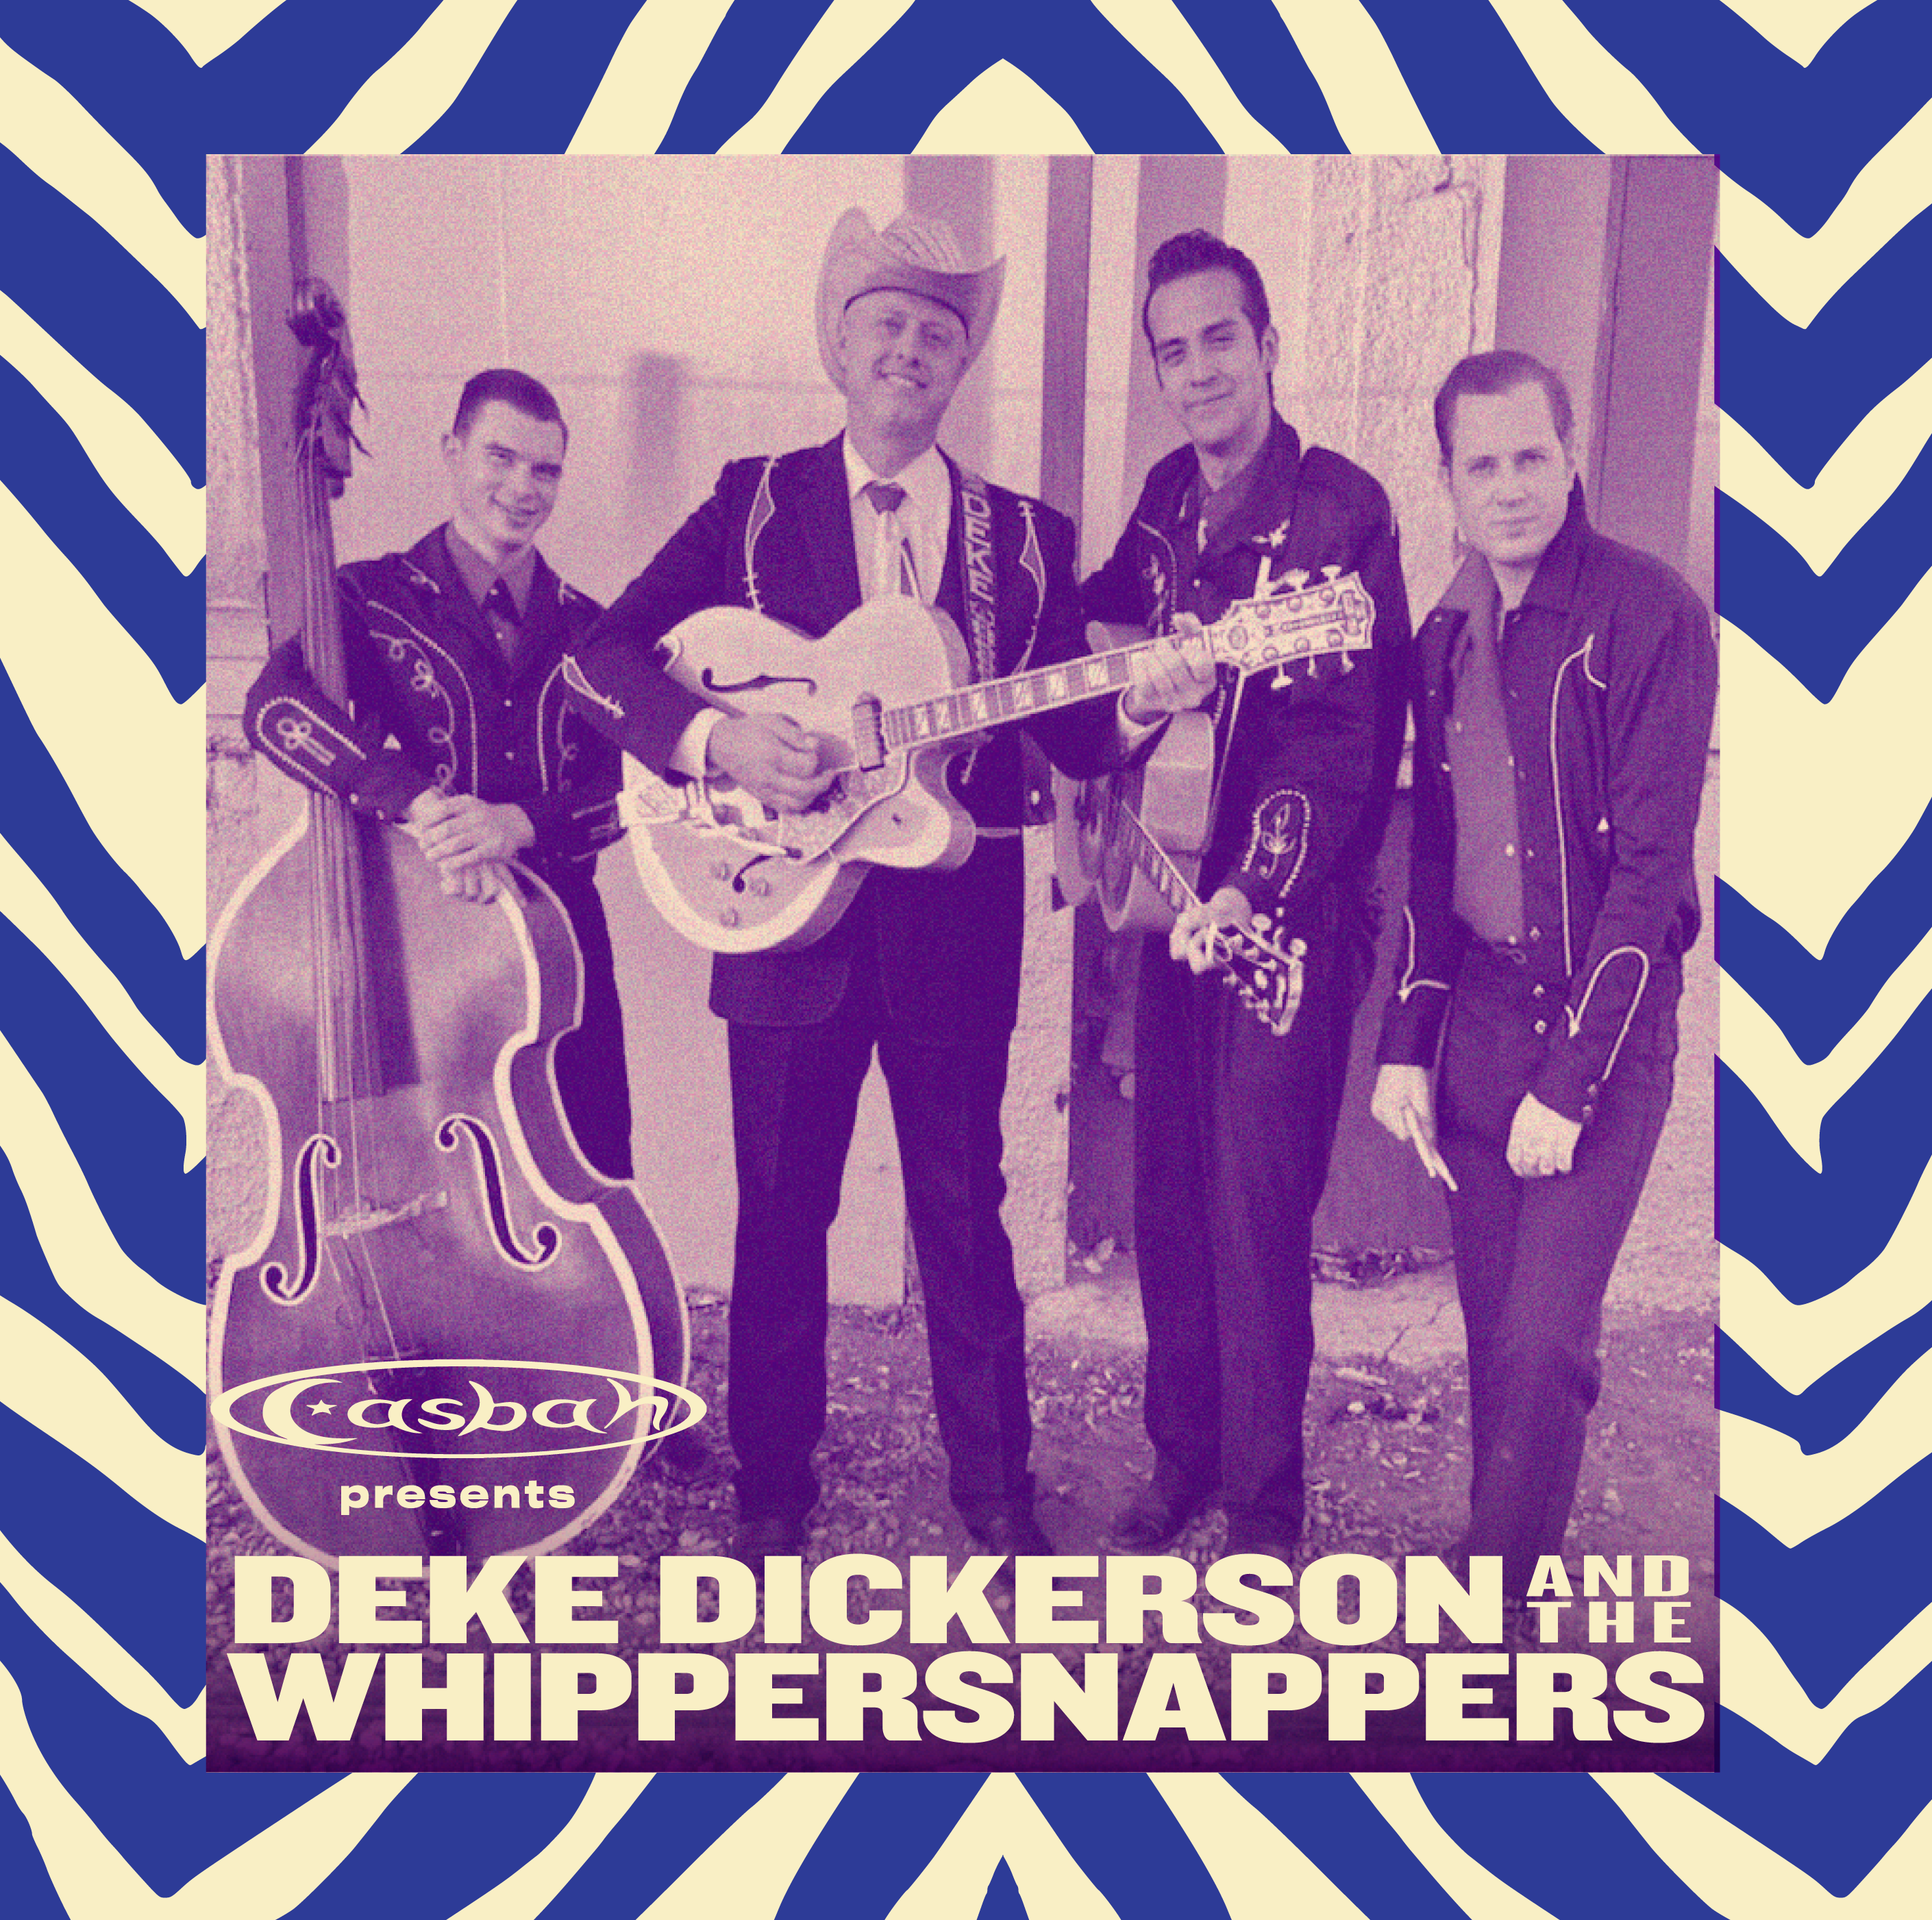 DEKE DICKERSON & THE WHIPPERSNAPPERS